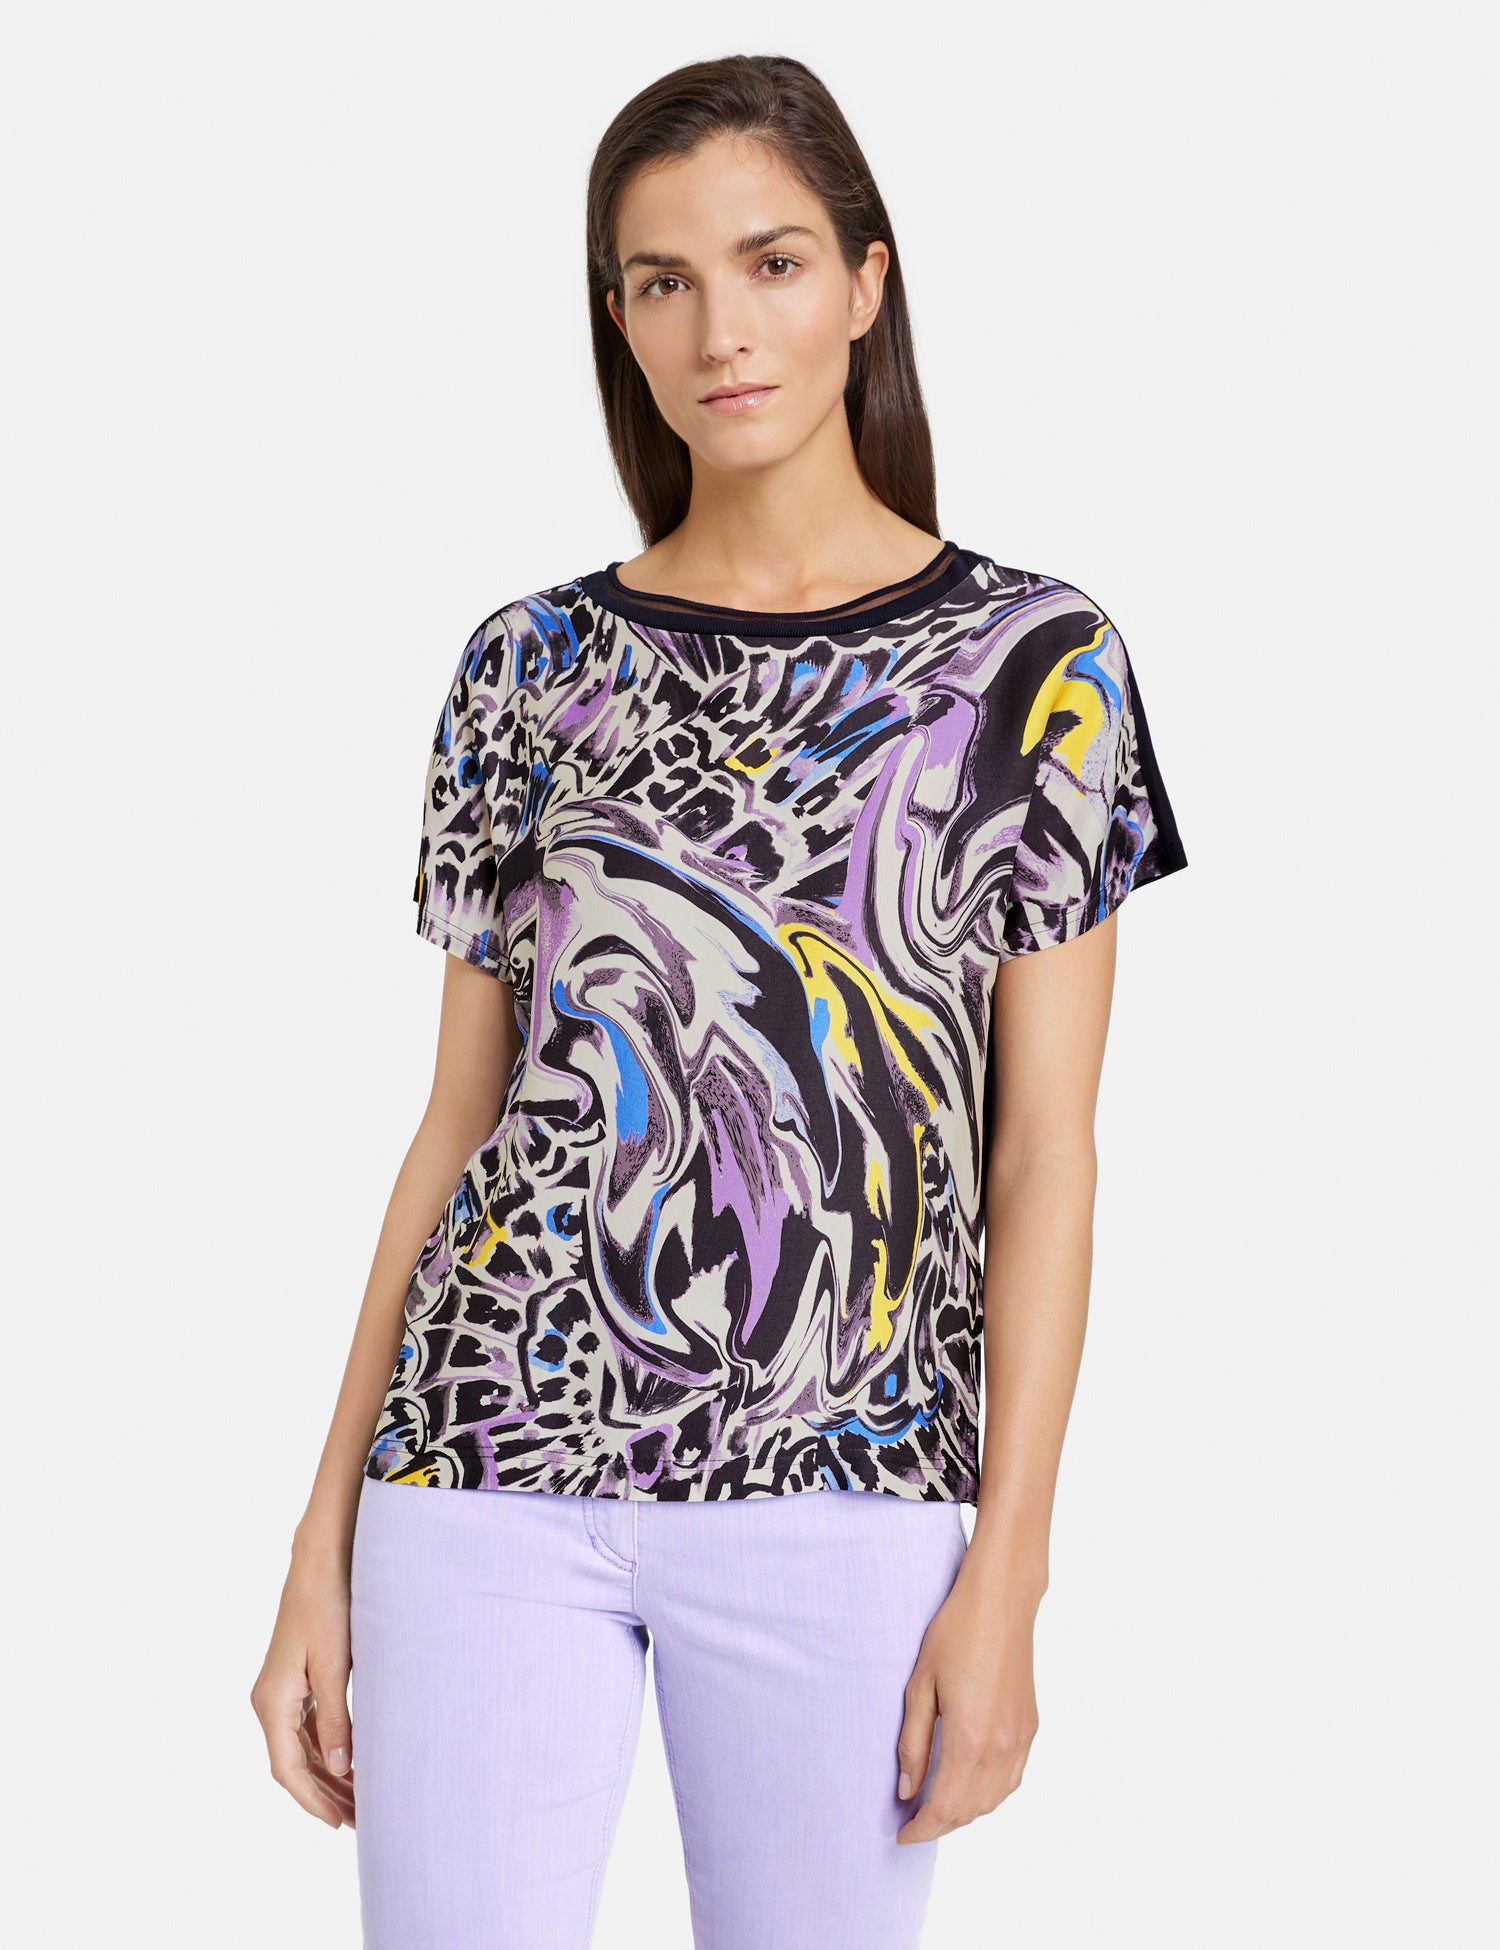 Blouse Top With A Front Print